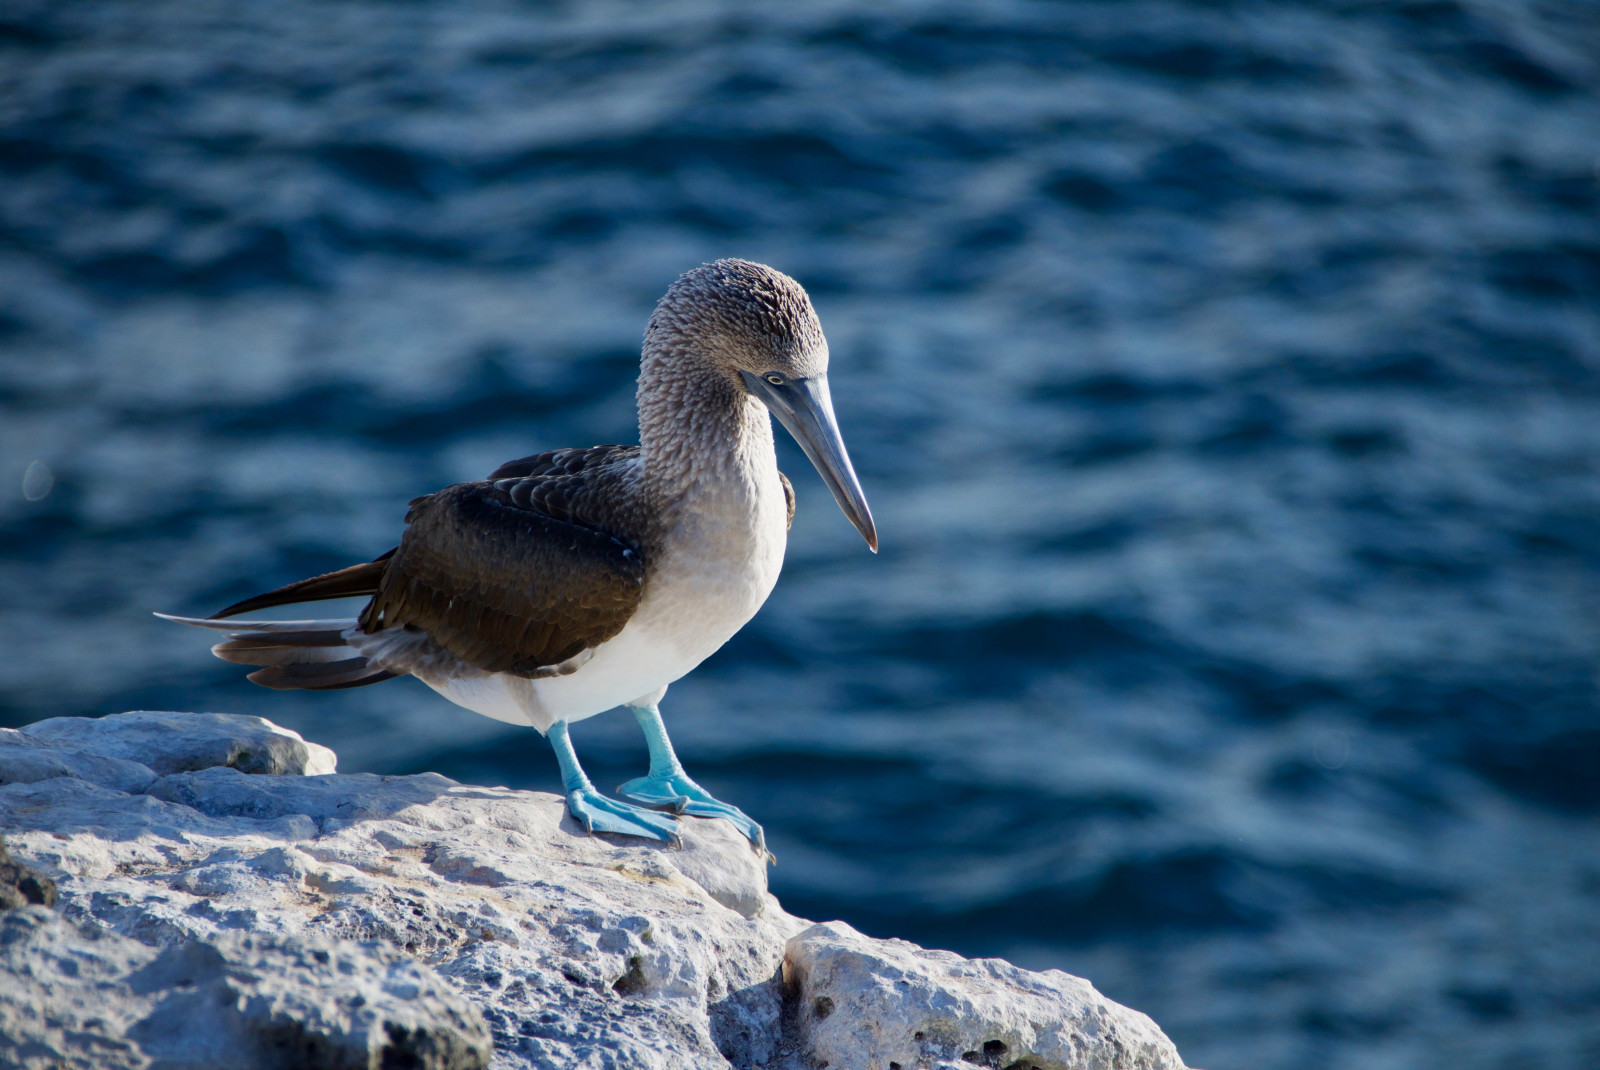 Bird sitting on a rock with water in the background in Galapagos Islands